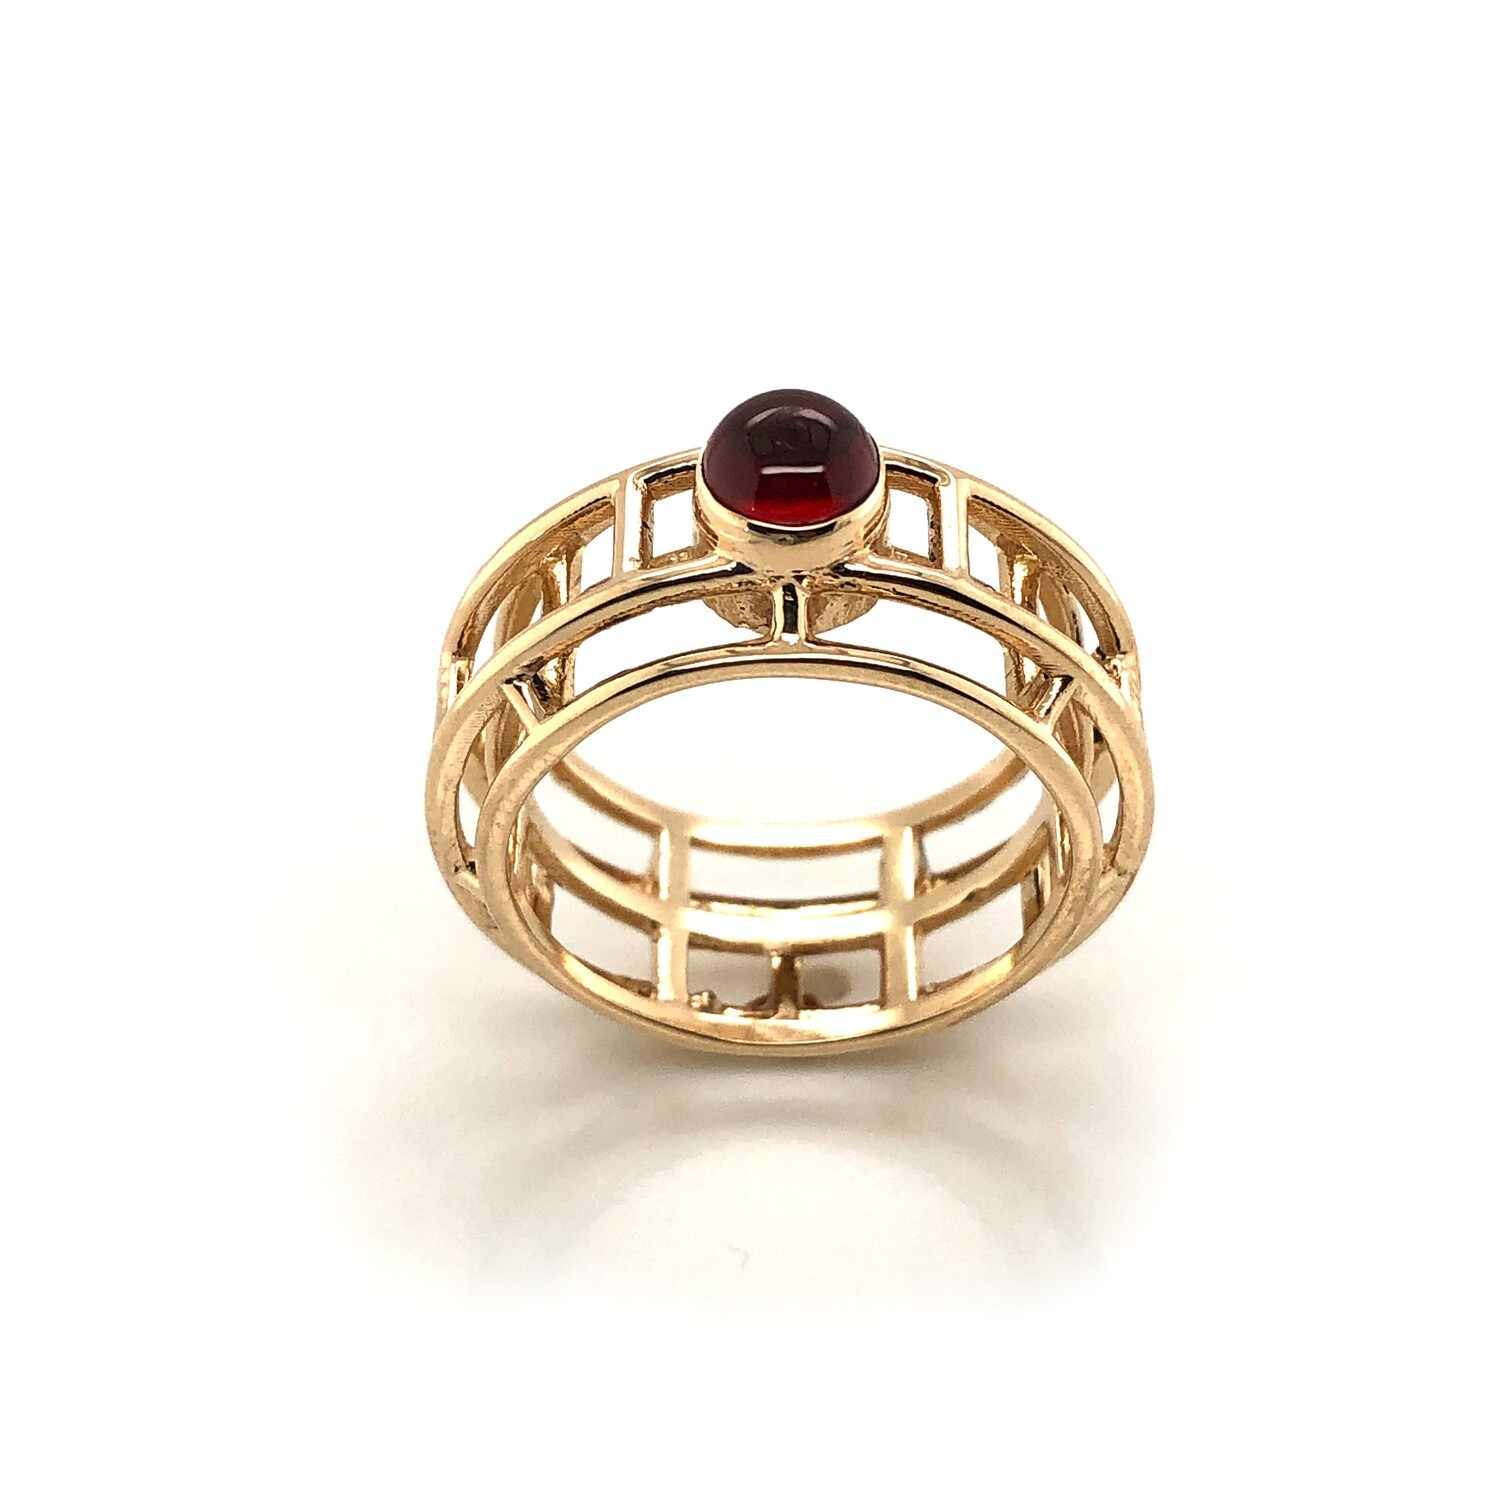 Caged.  14k and garnet ring.